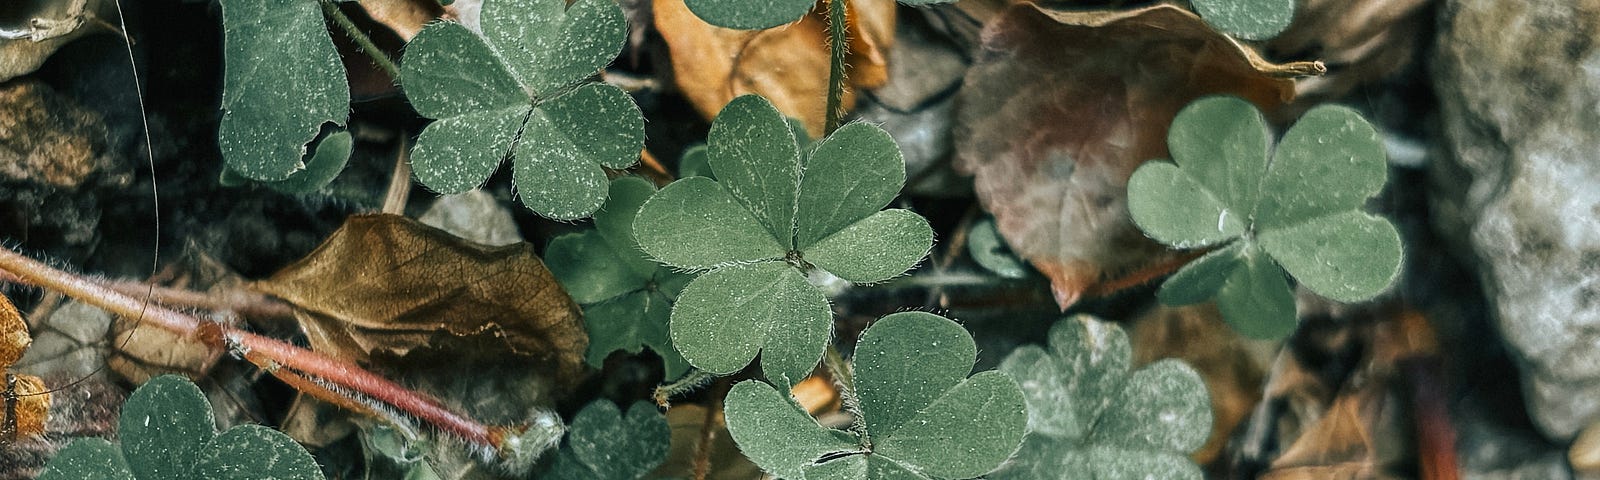 Three leaf clovers nestled in a bunch, surrounded by dead leaves.